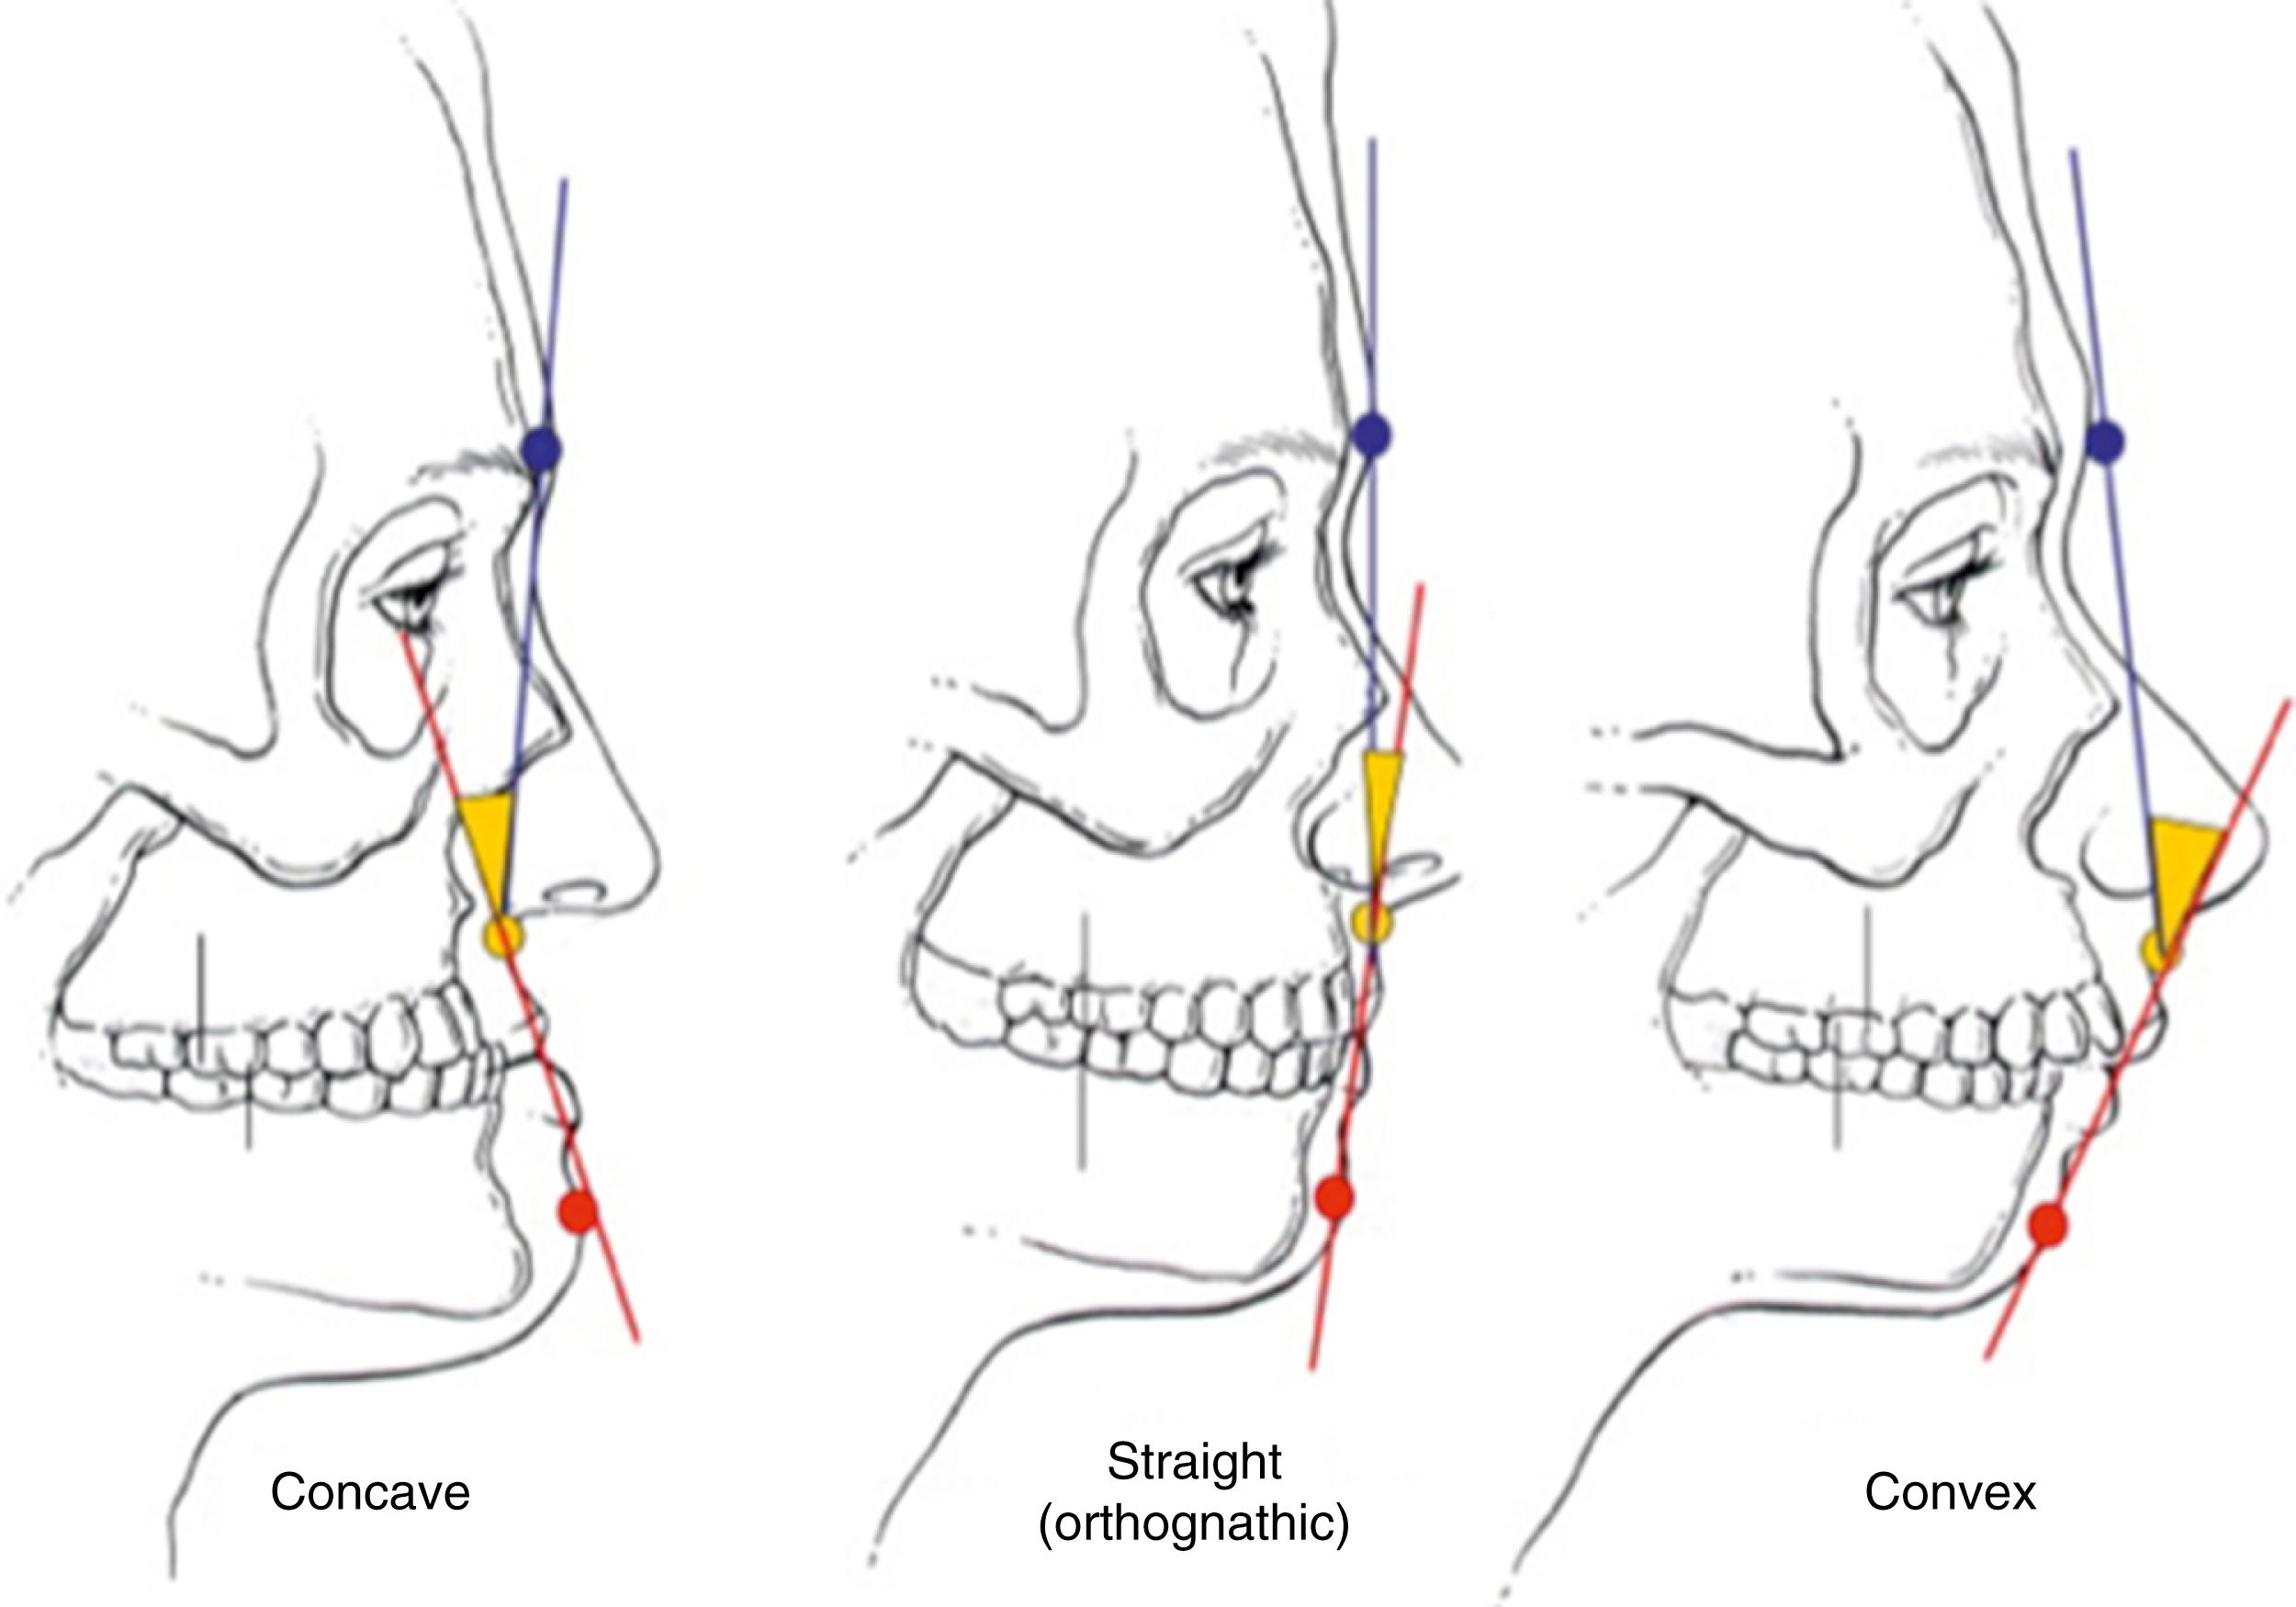 Fig. 21.7, Facial profile analysis. The facial profile can be classified as concave, convex, or straight.